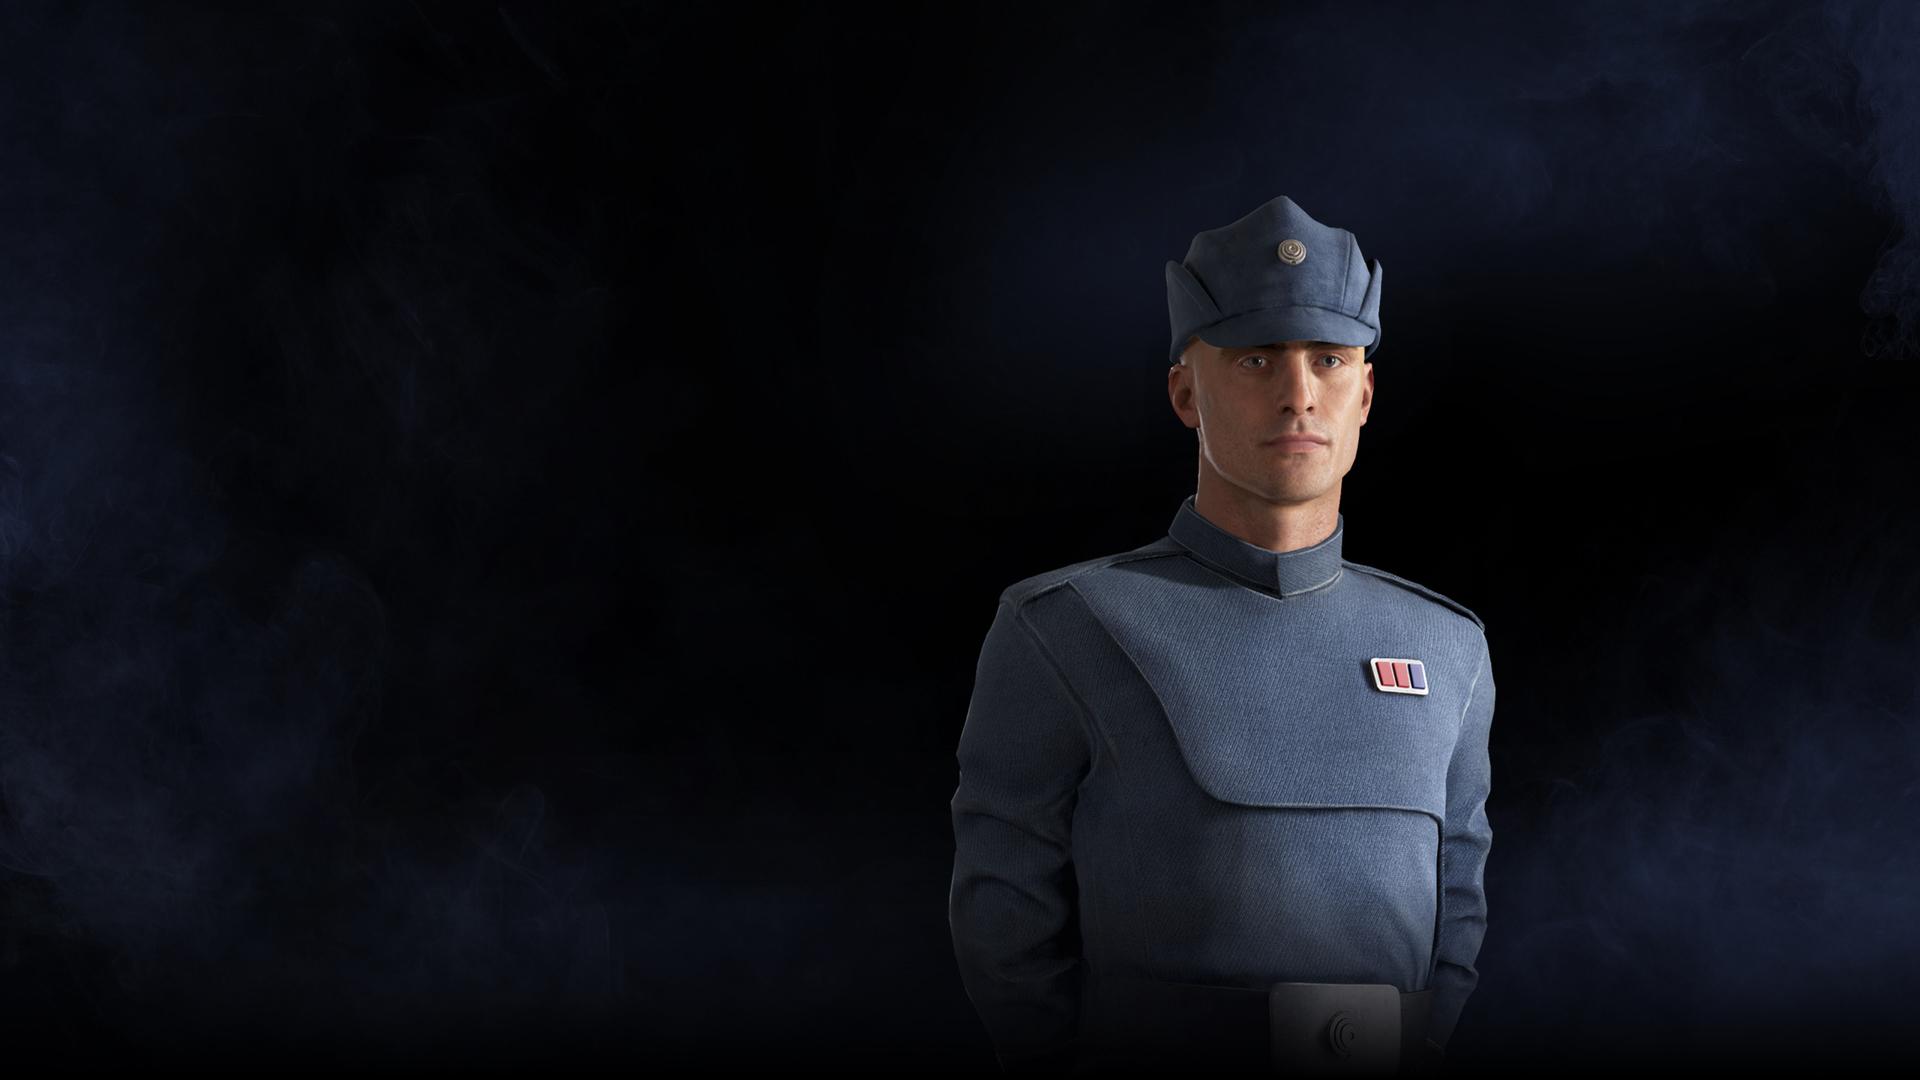 Imperial Officer. Wallpaper from Star Wars: Battlefront II